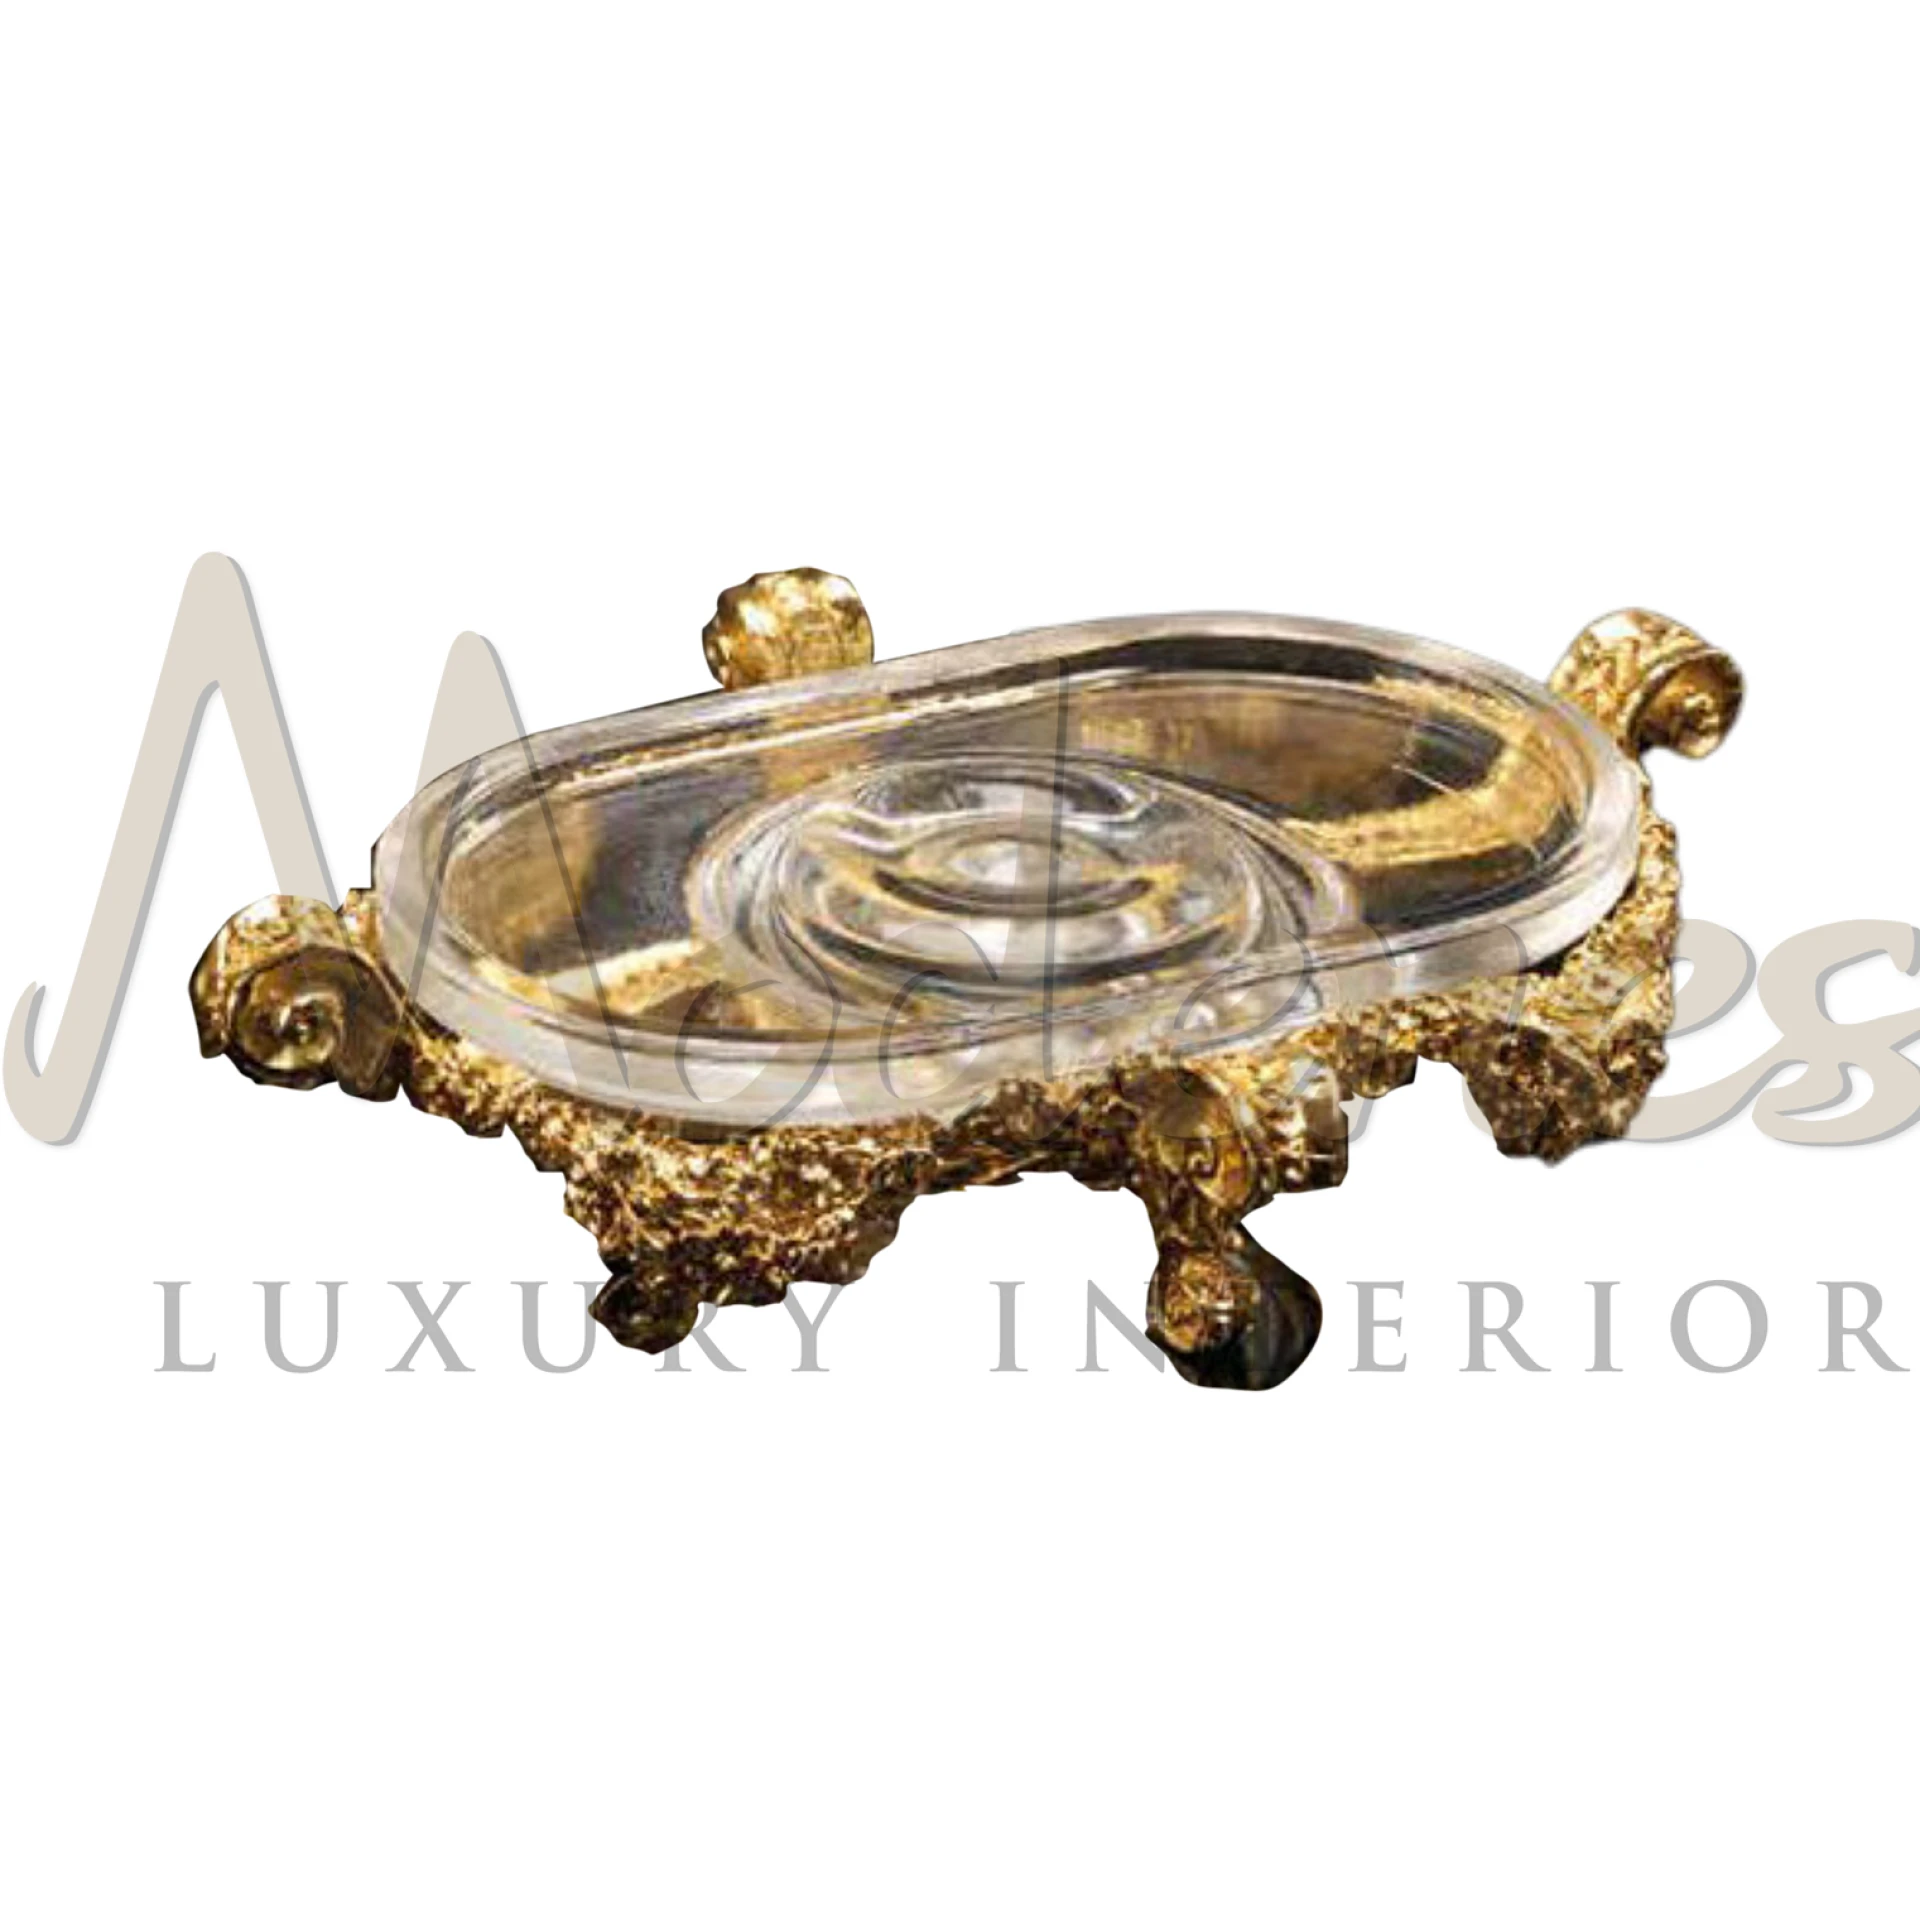 Royal Soap Dish enriched with gold or silver, jewels, or crystals, offering an elegant and luxurious accent to any bathroom interior.